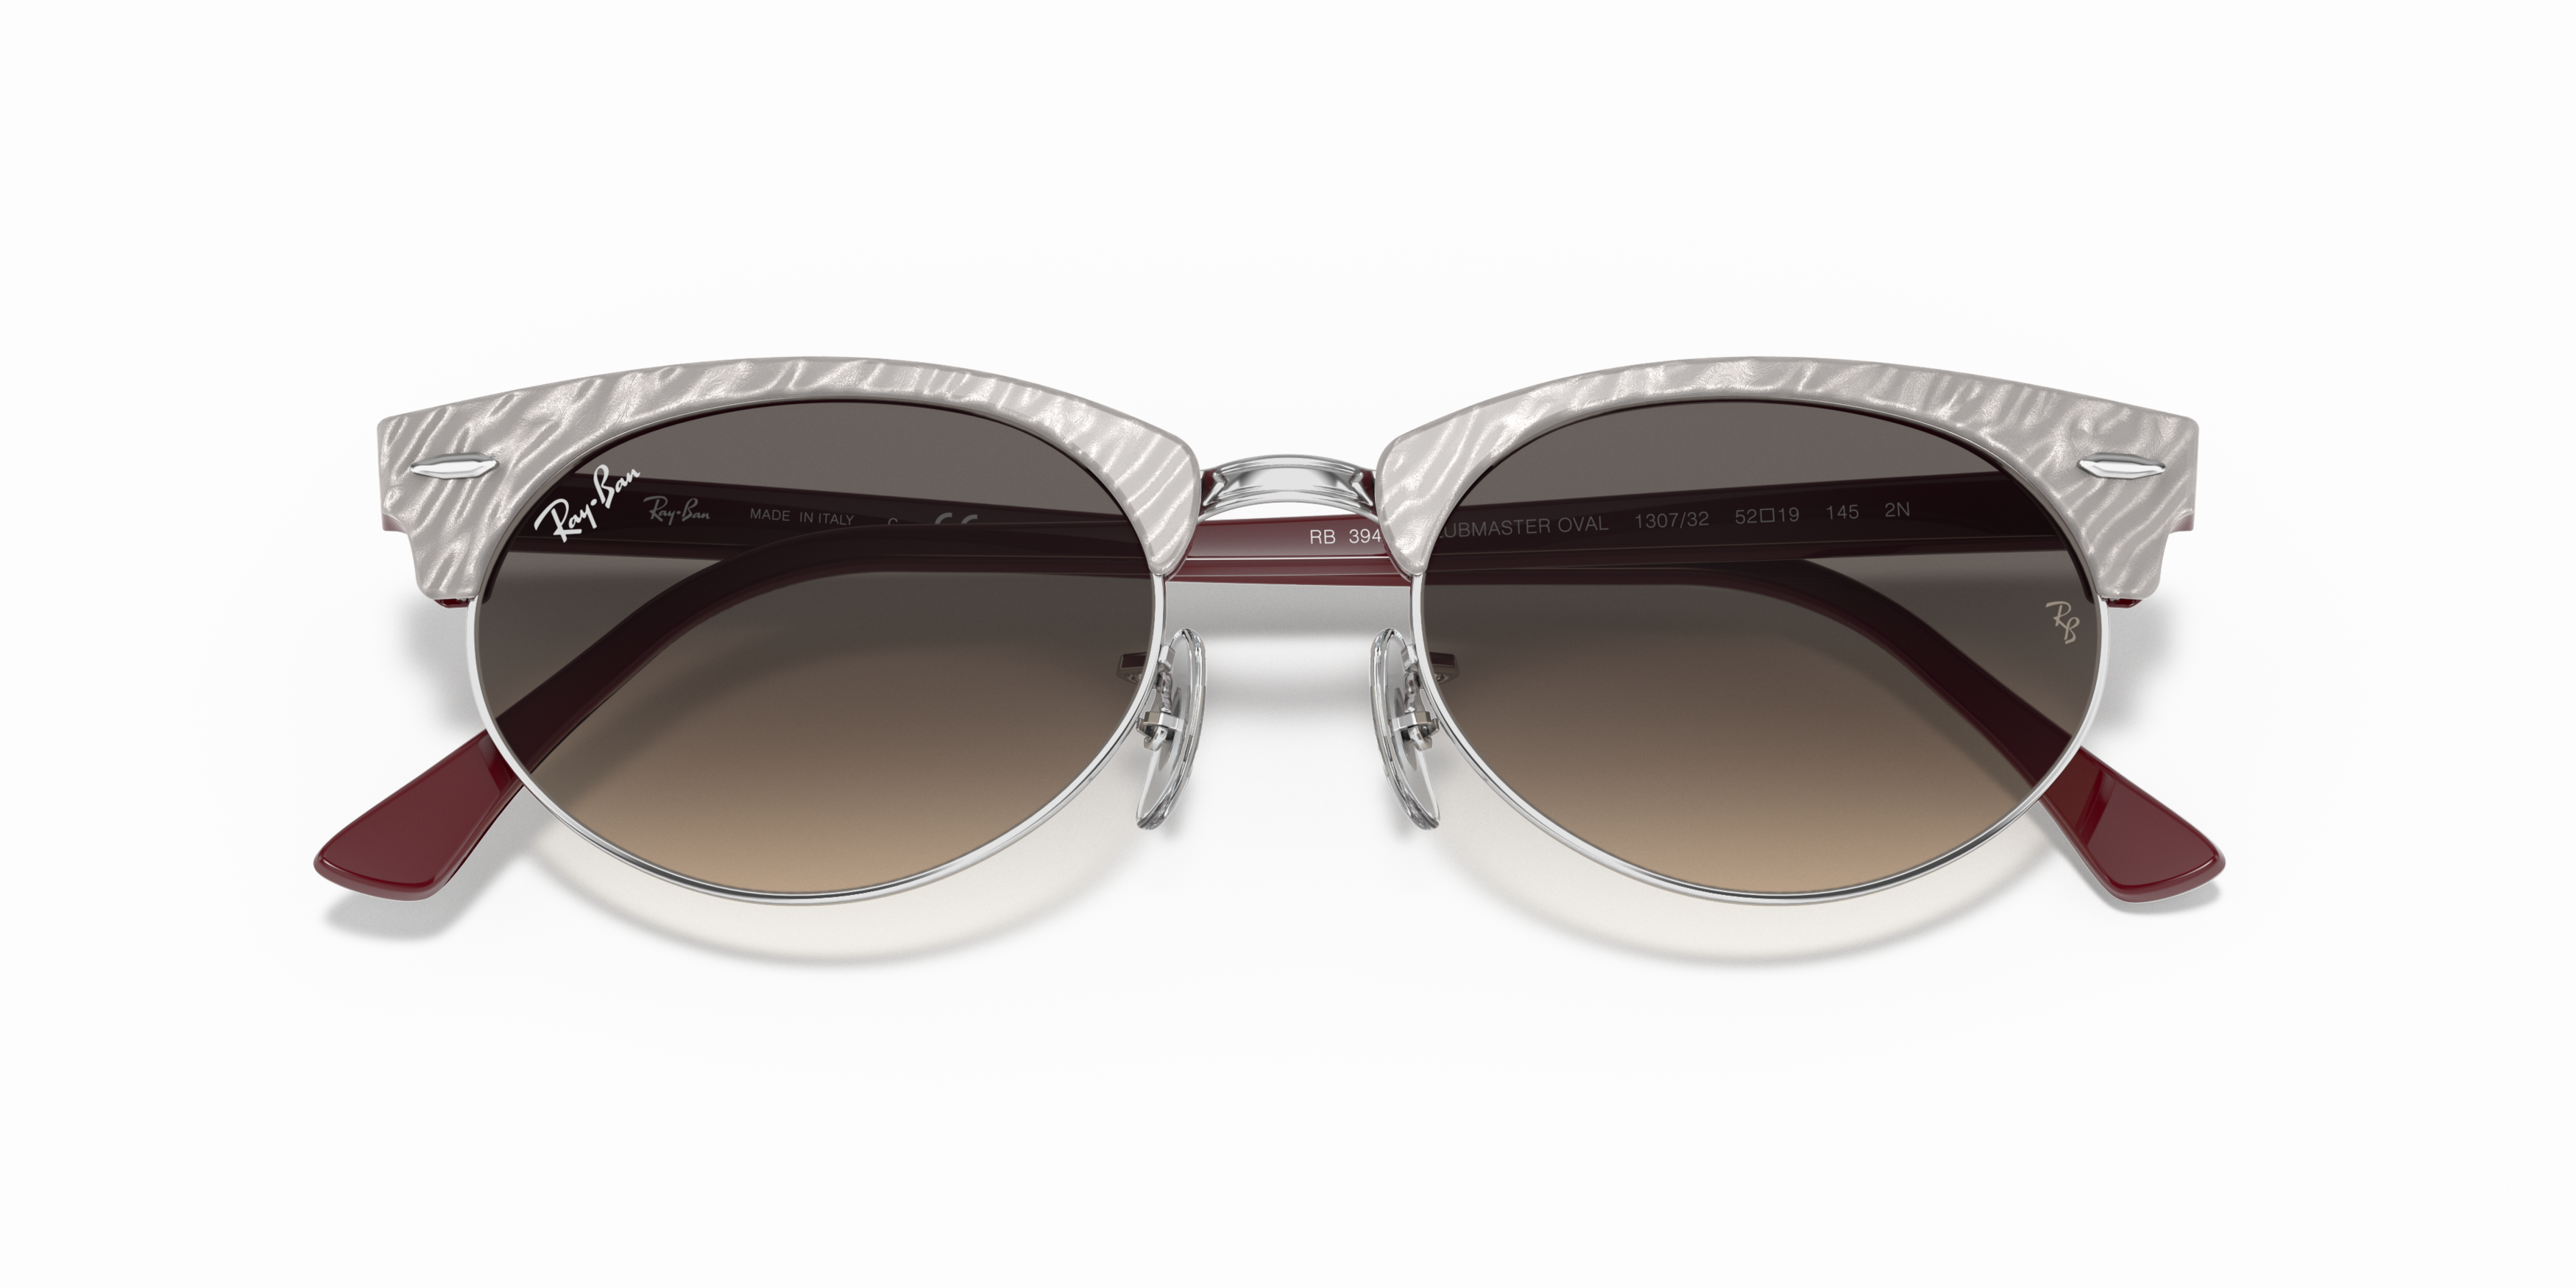 [products.image.folded] Ray-Ban Clubmaster Oval RB3946 130732